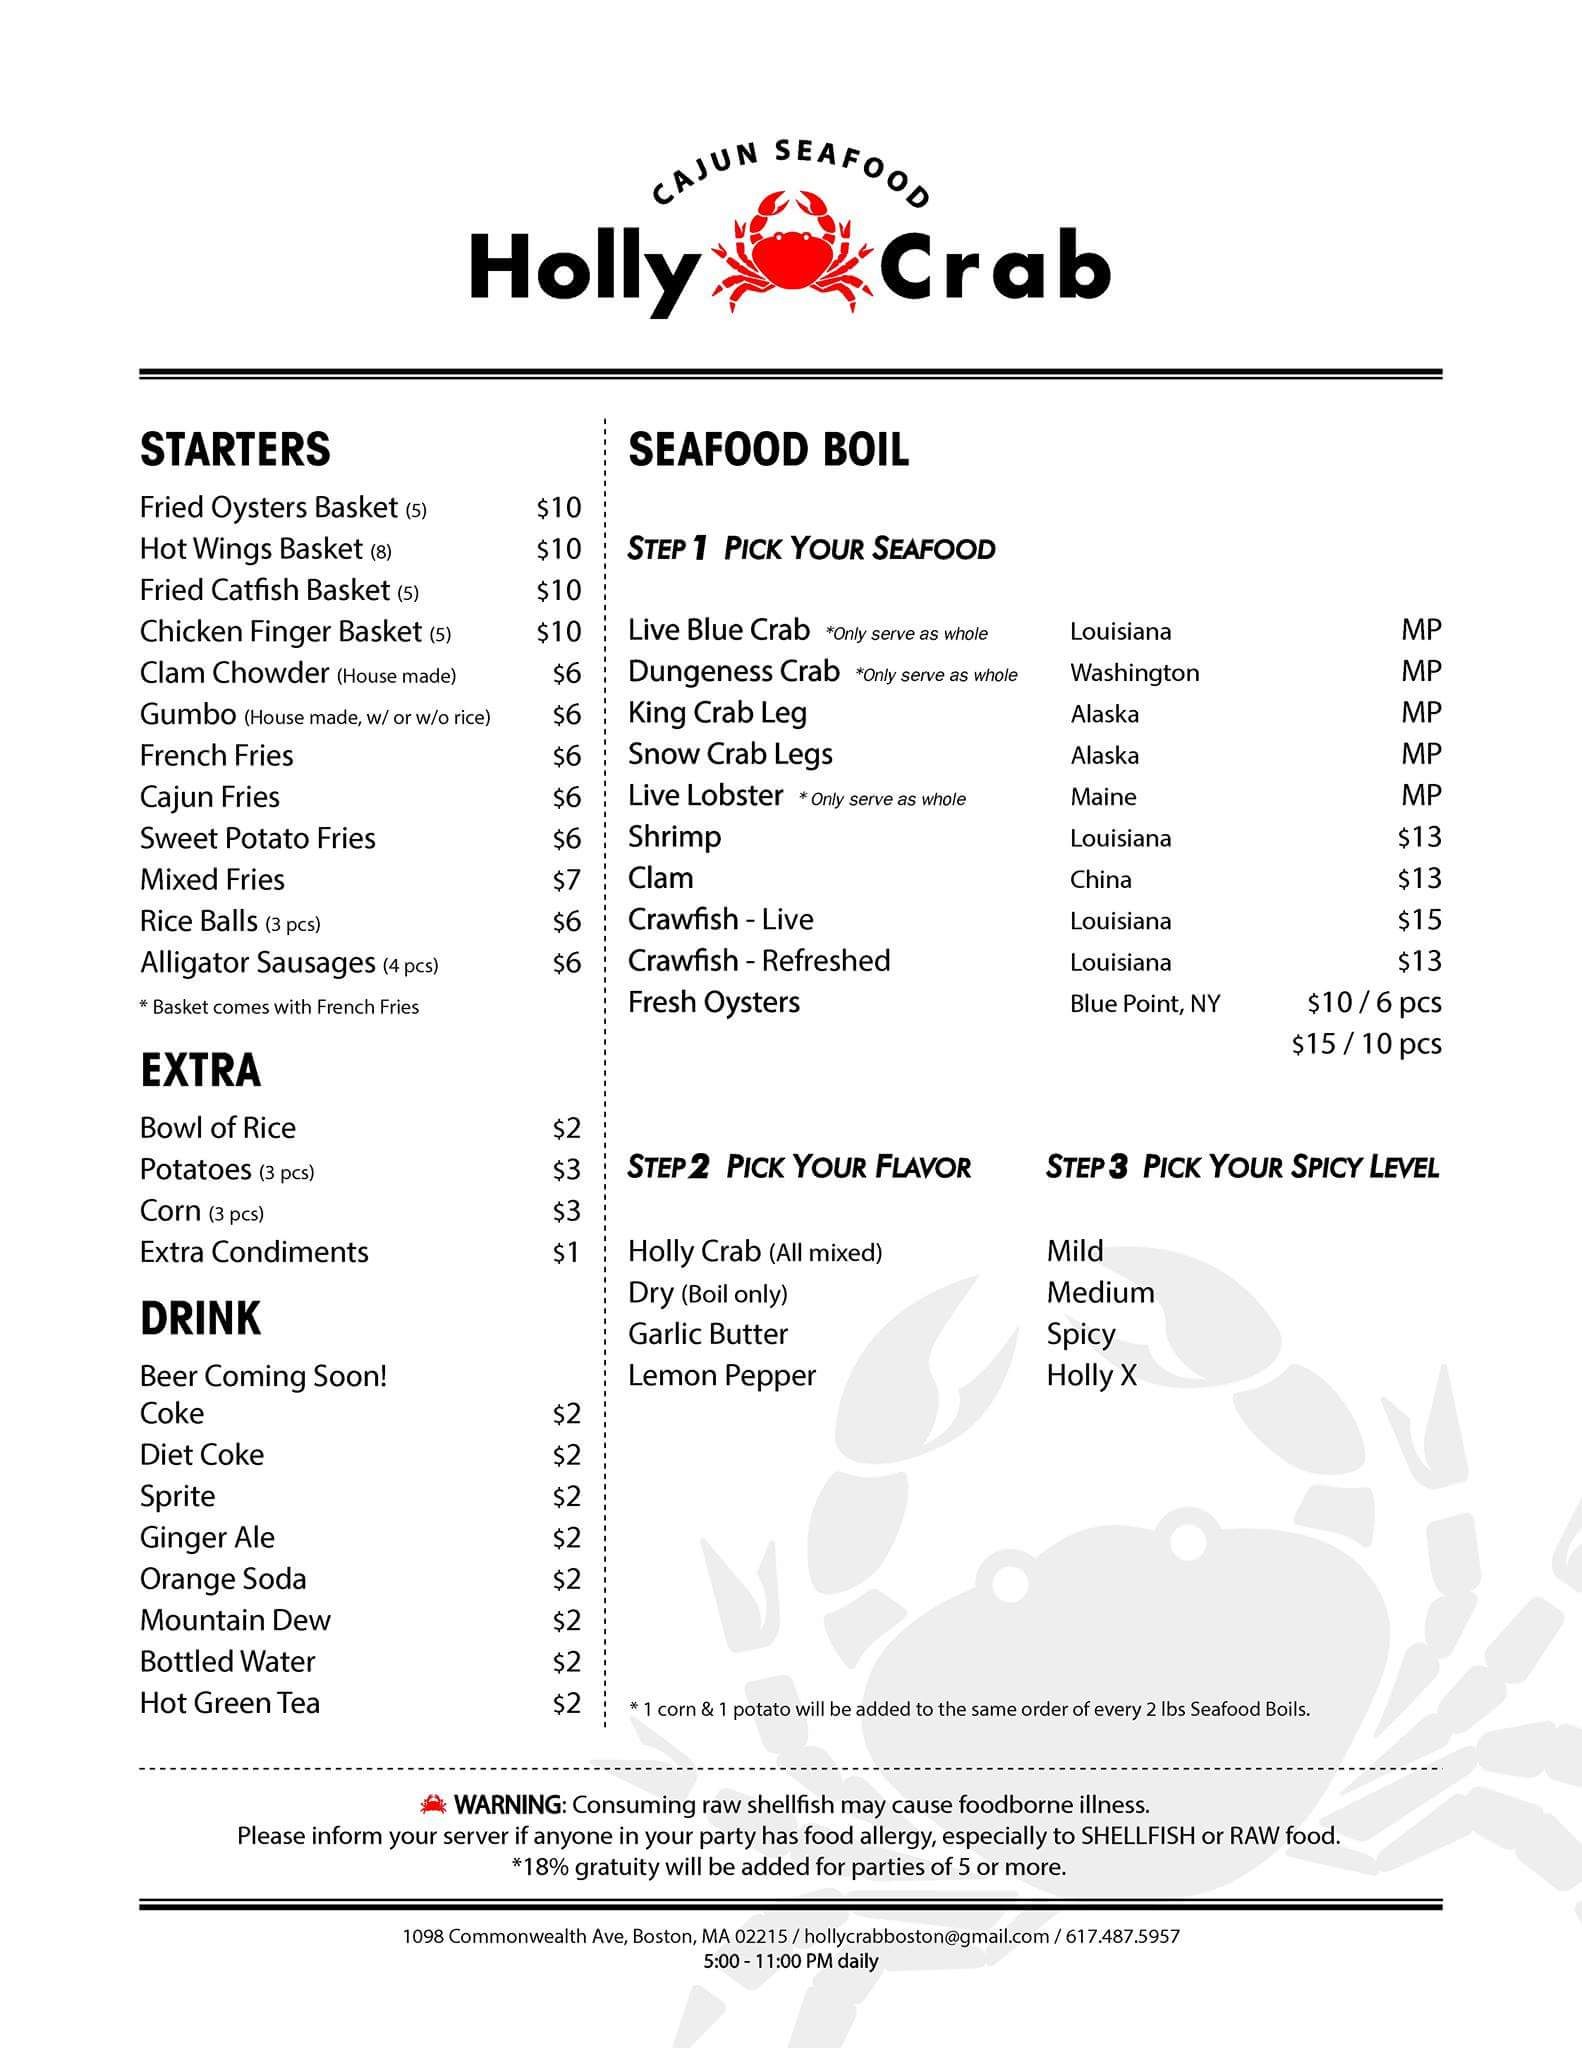 The Holy Crab